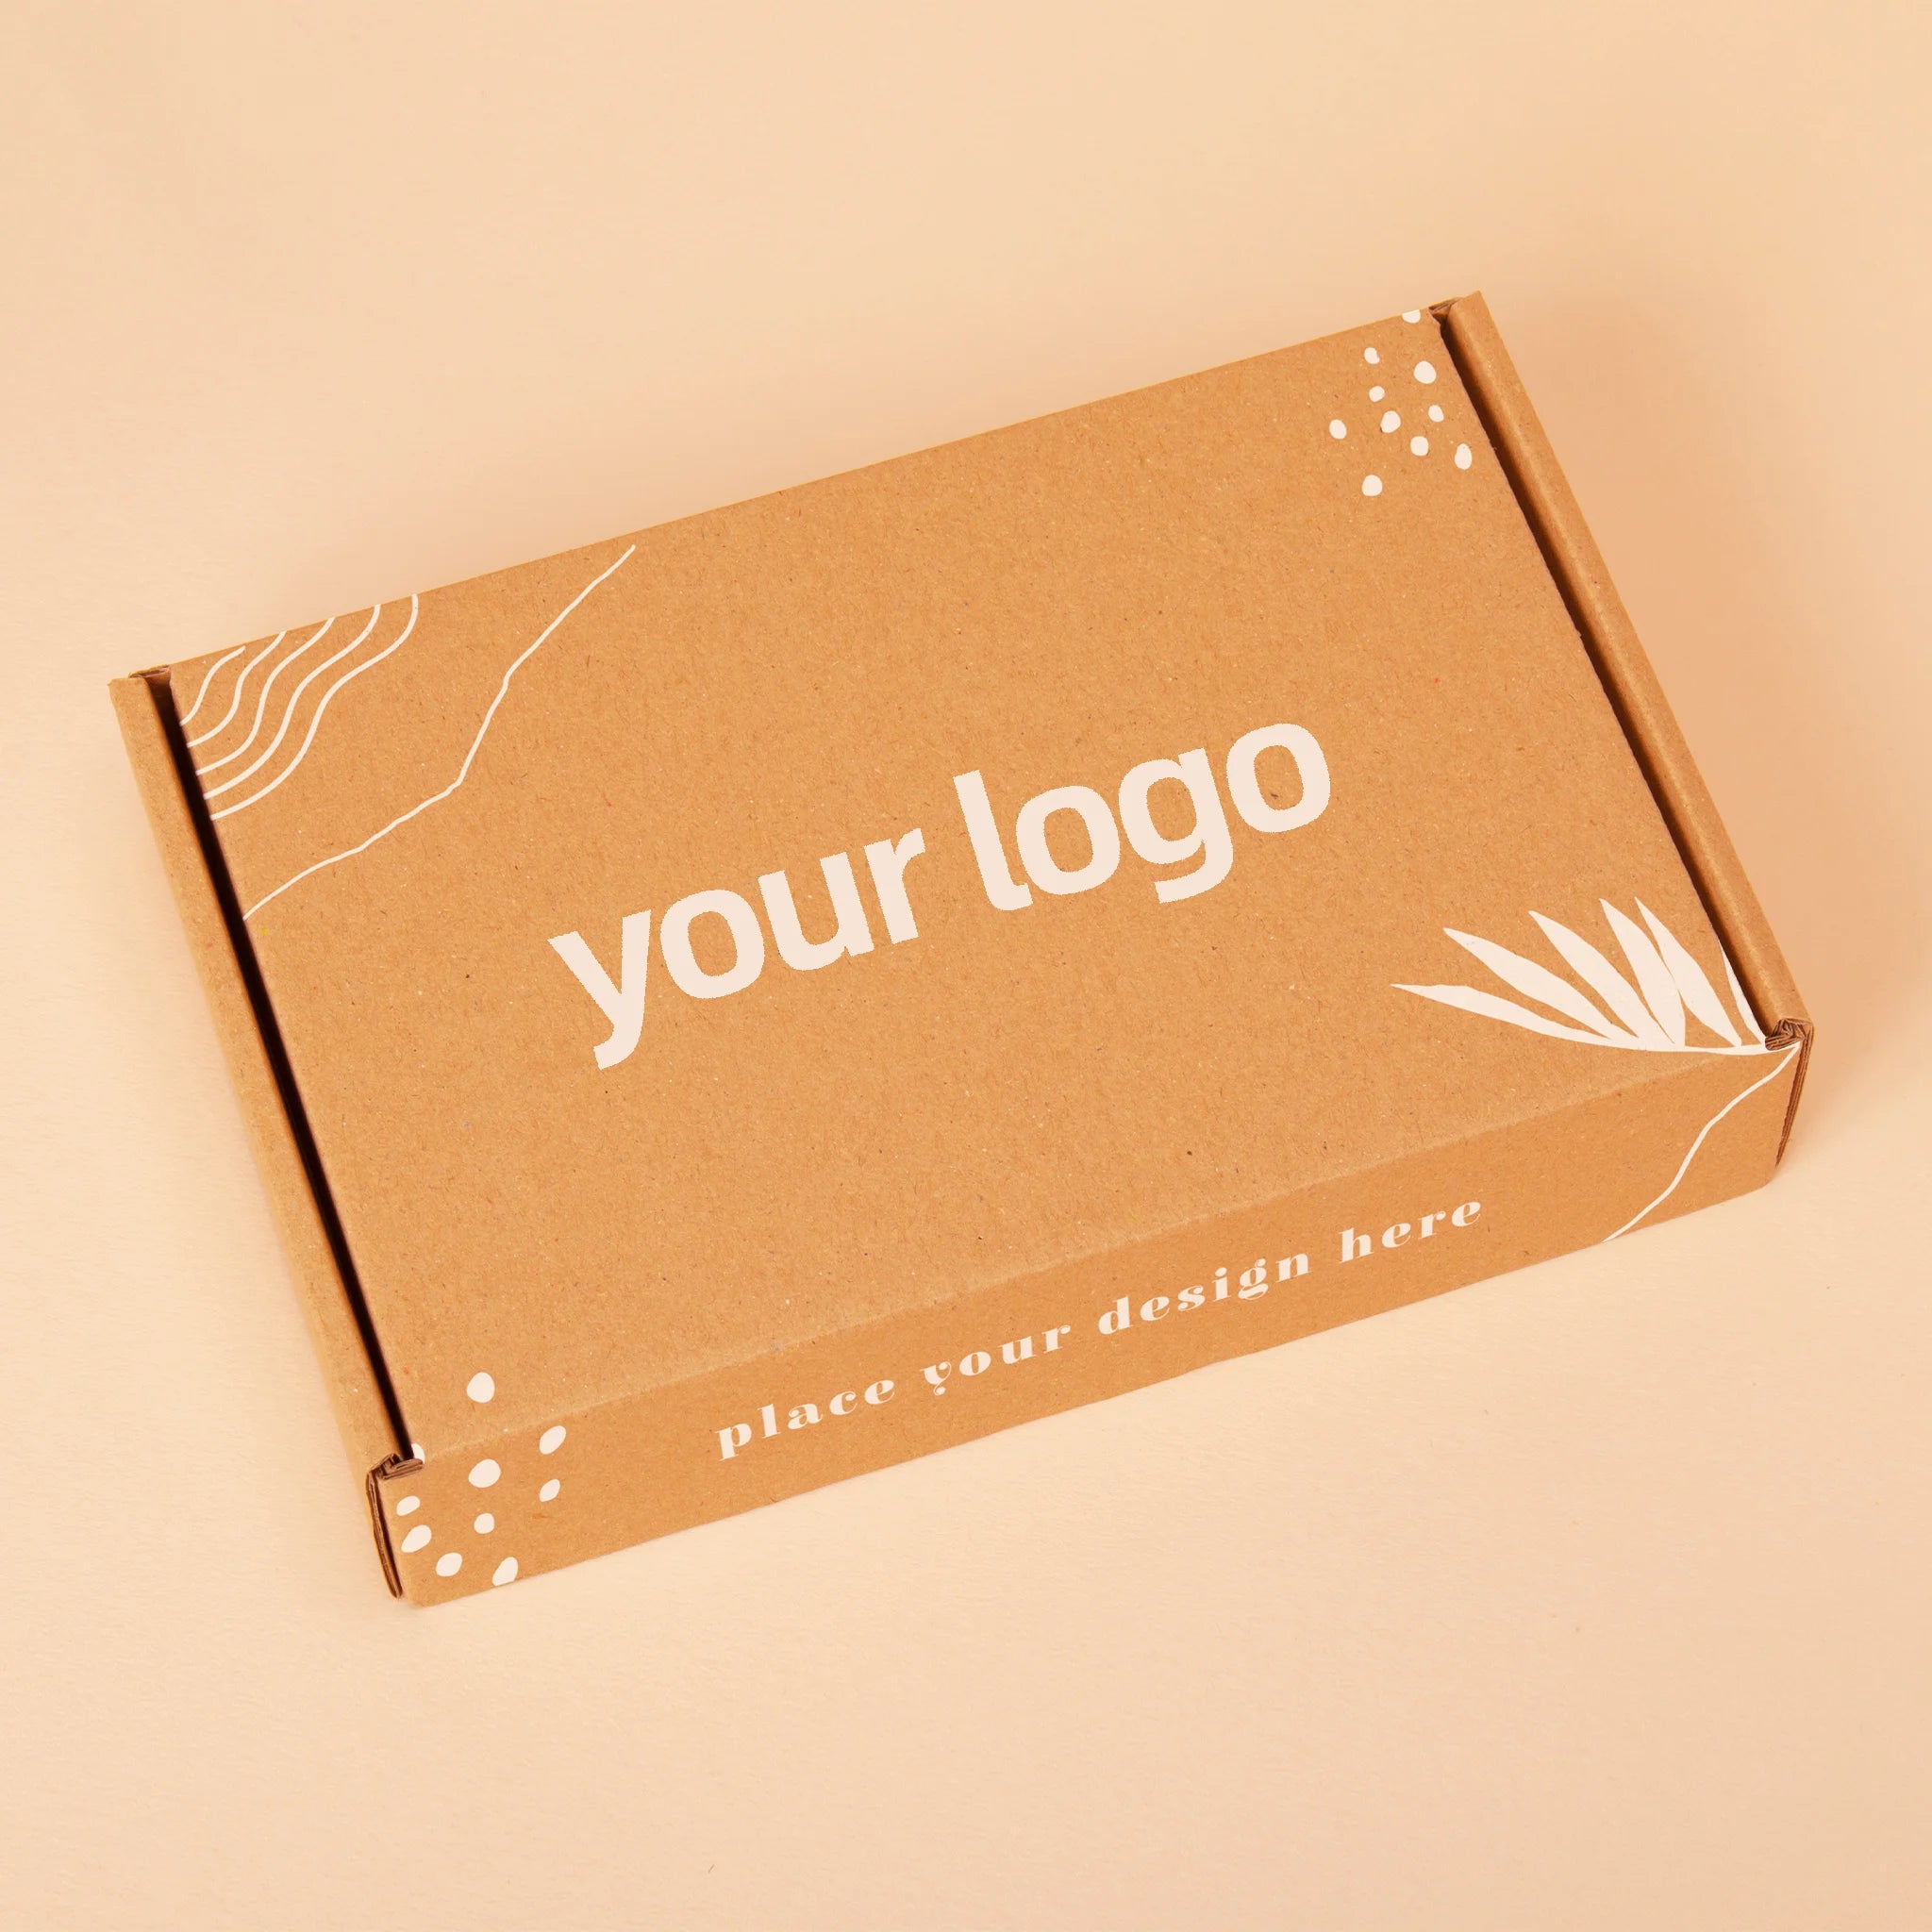 printed and branded mailer box